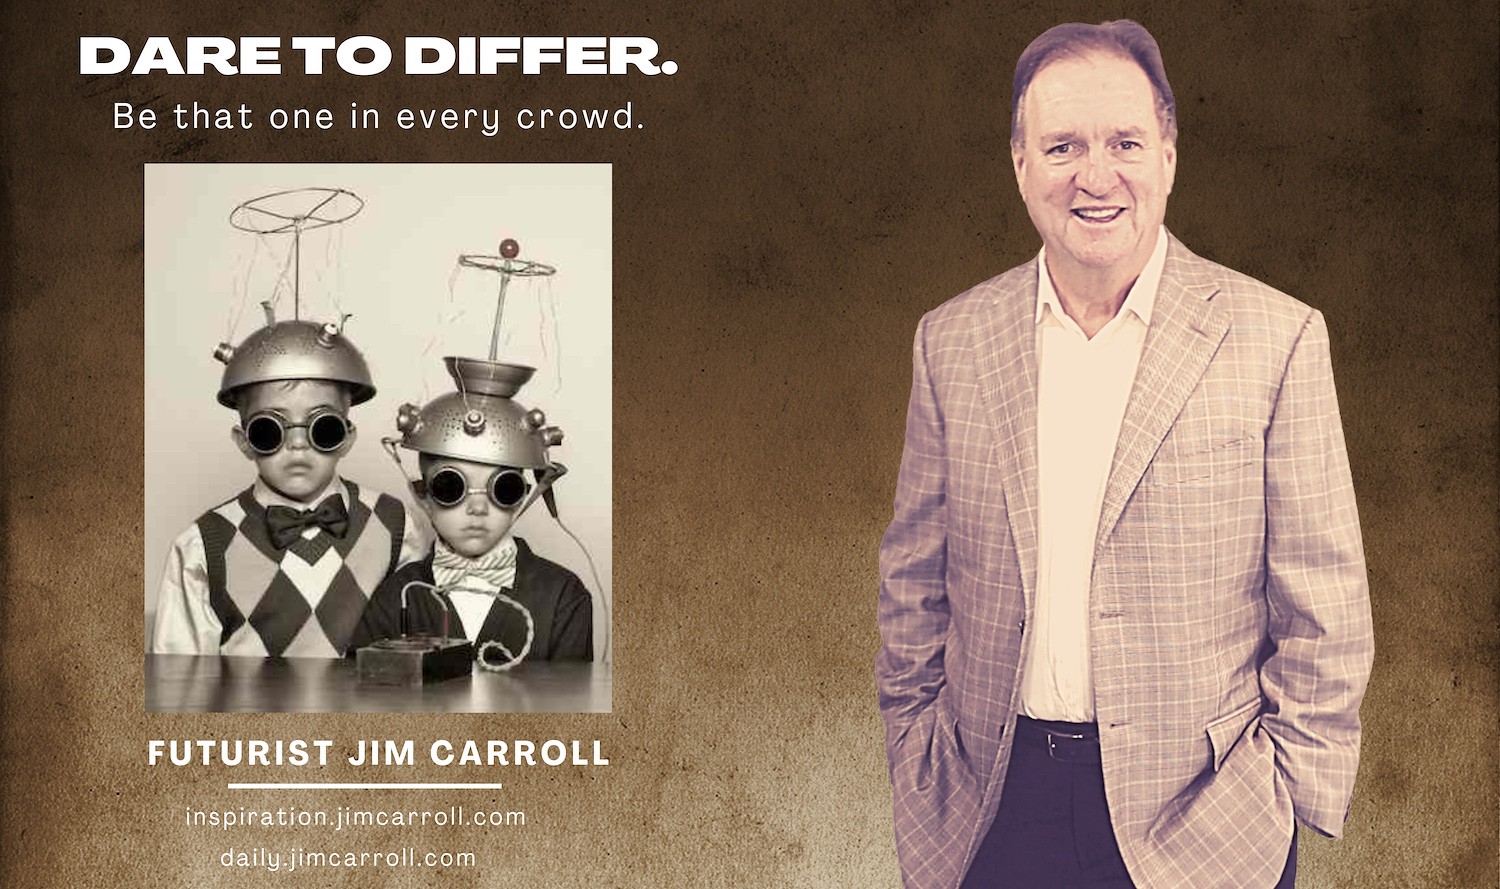 Daily Inspiration: "Dare to differ. Be that one in every crowd!" - Futurist Jim Carroll